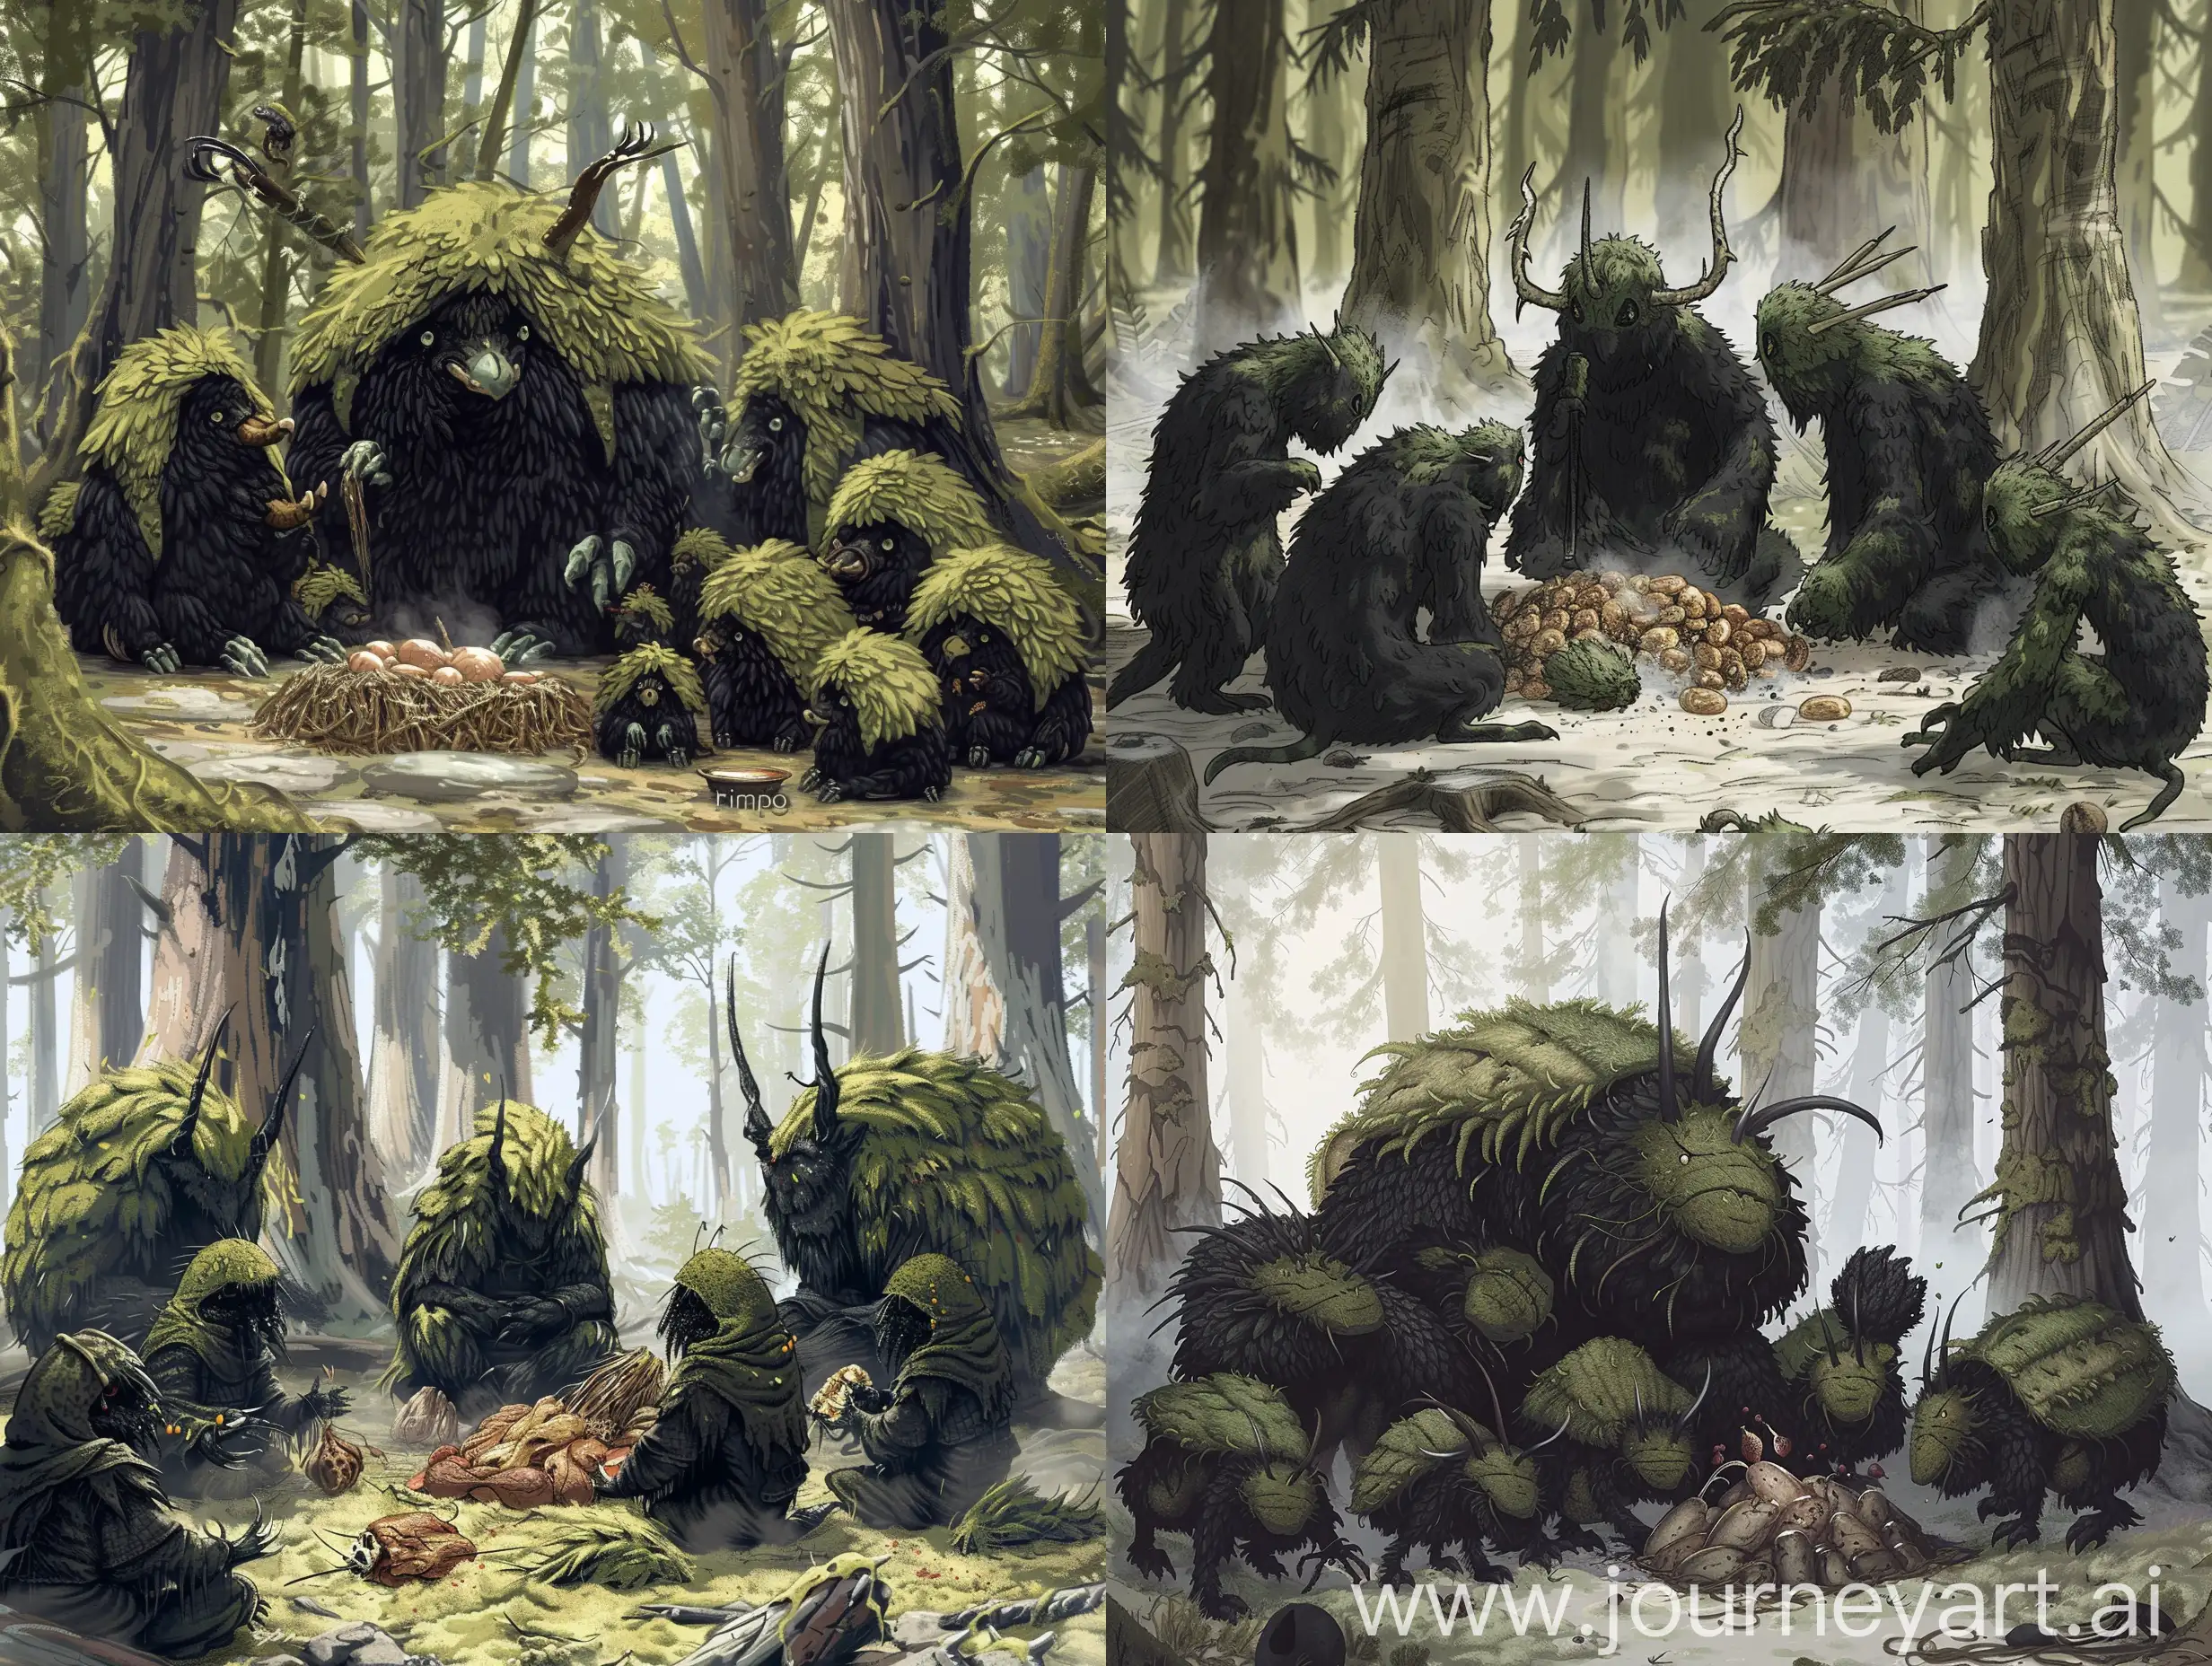 Feast-of-the-Rimpos-Enchanted-Creatures-of-Tifa-Forest